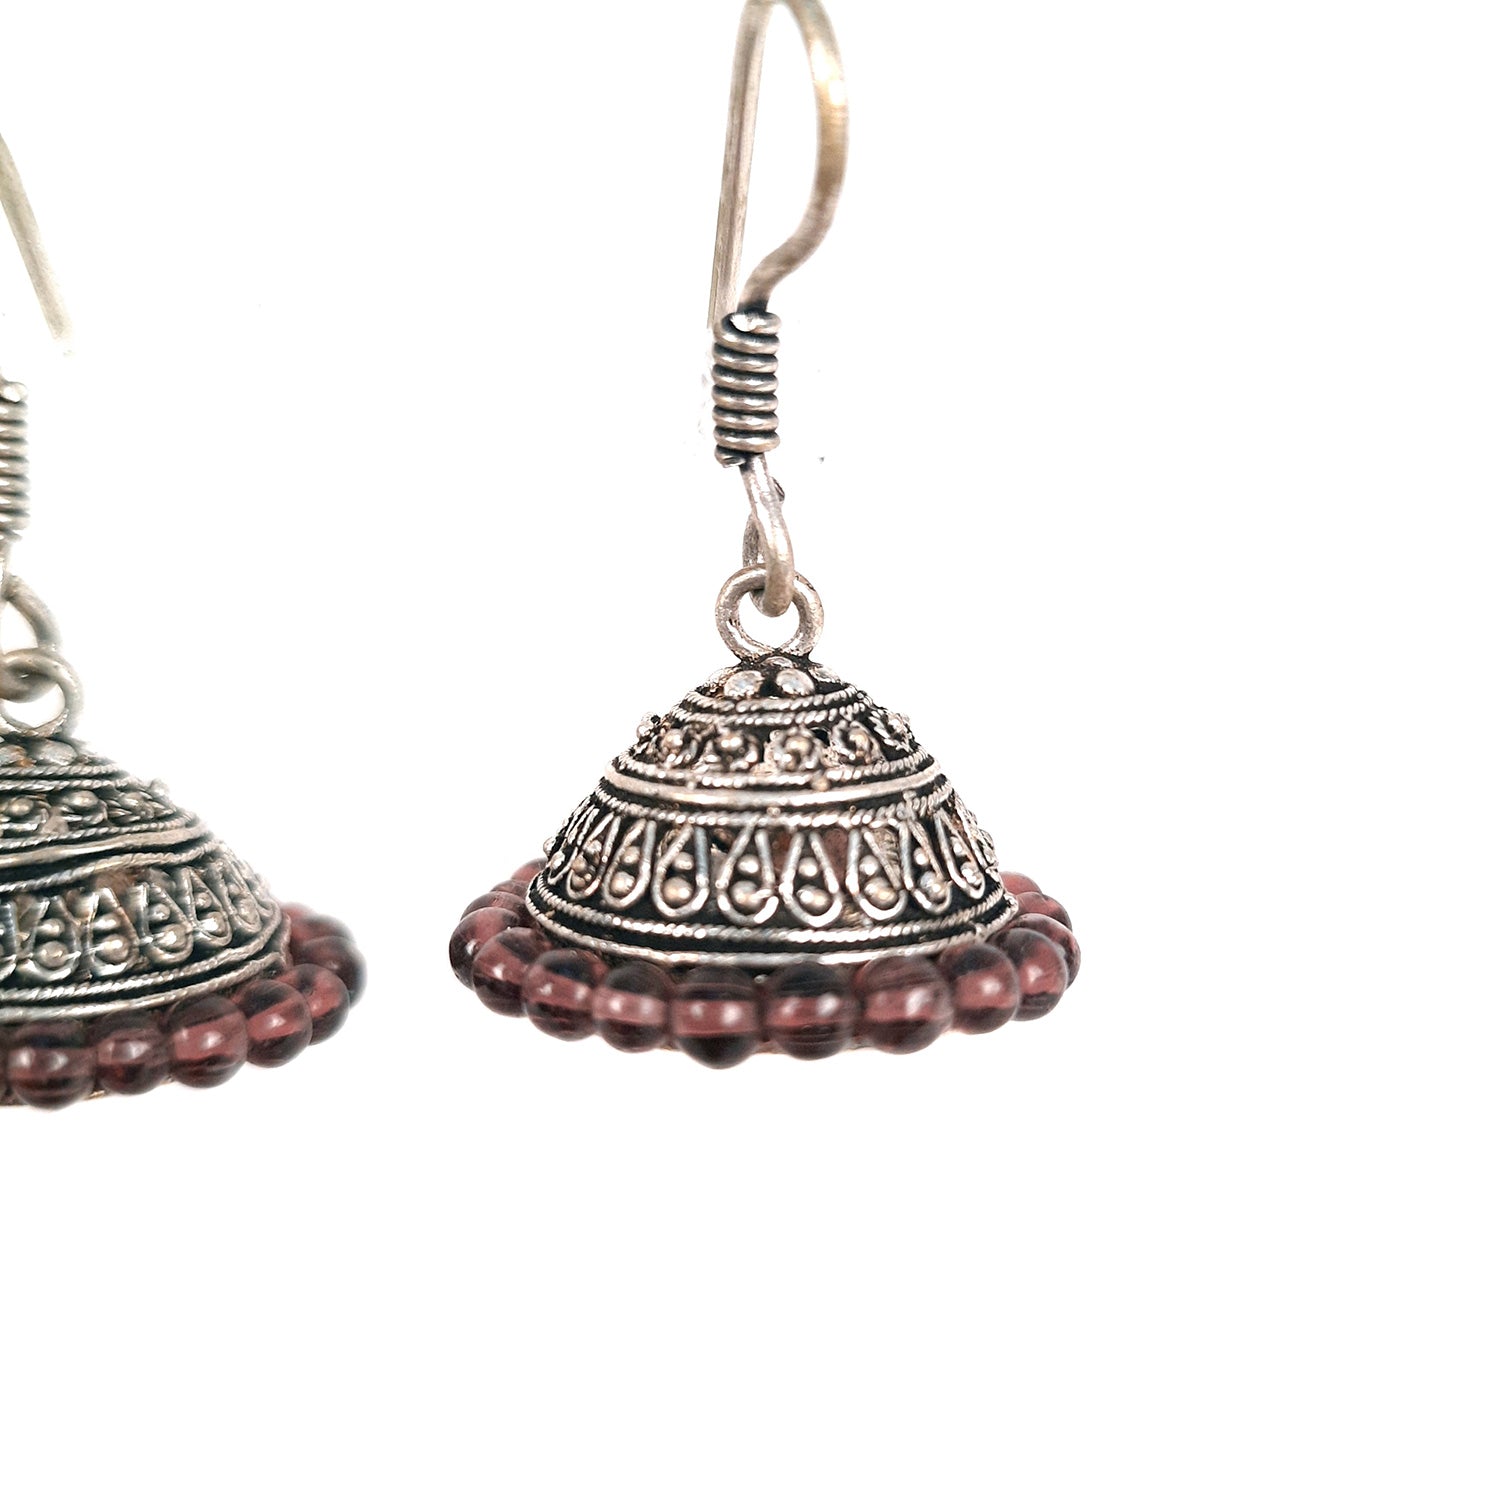 Oxidised Silver Plated Jhumka earrings for Girls and Women | Latest Stylish Fashion Jewellery | Gifts for Her, Friendship Day, Valentine's Day Gift - Apkamart